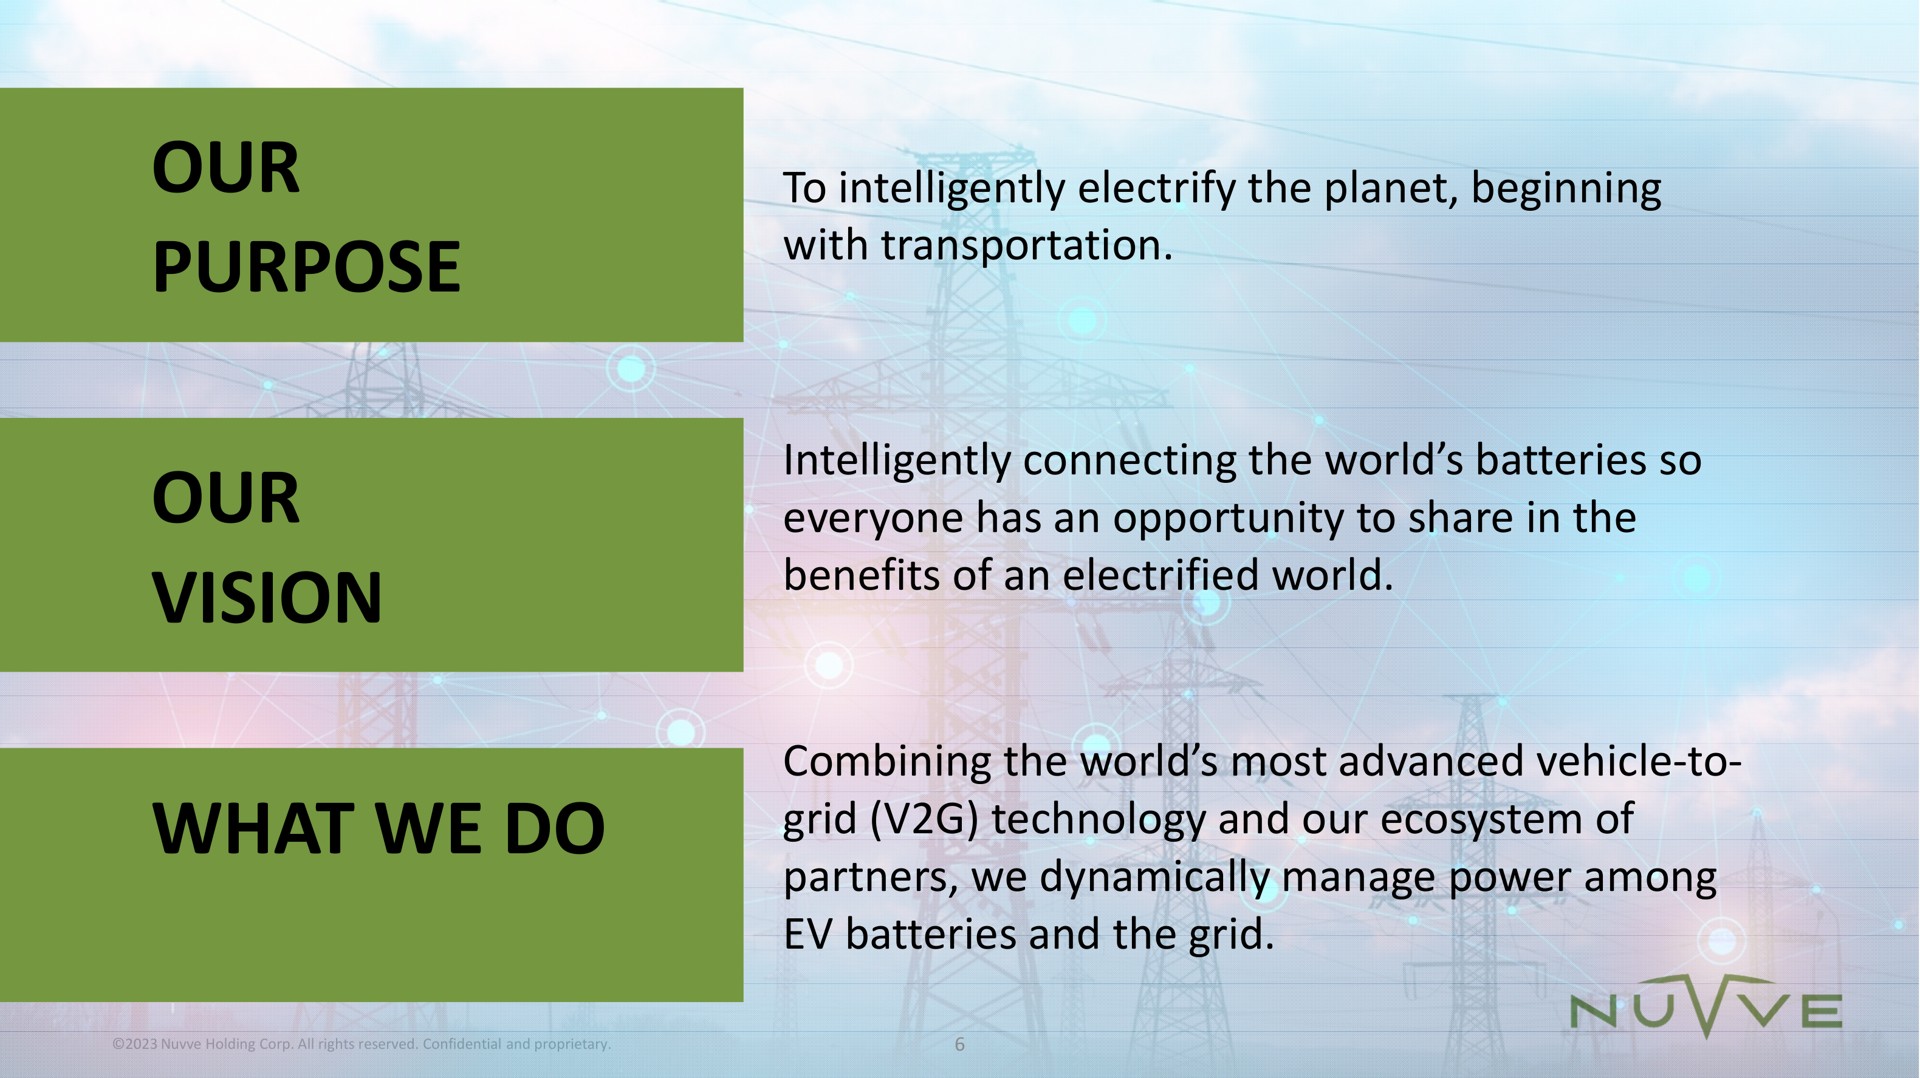 our purpose our vision to intelligently electrify the planet beginning with transportation intelligently connecting the world batteries so everyone has an opportunity to share in the benefits of an electrified world what we do combining the world most advanced vehicle to grid technology and our ecosystem of partners we dynamically manage power among batteries and the grid eric sate | Nuvve